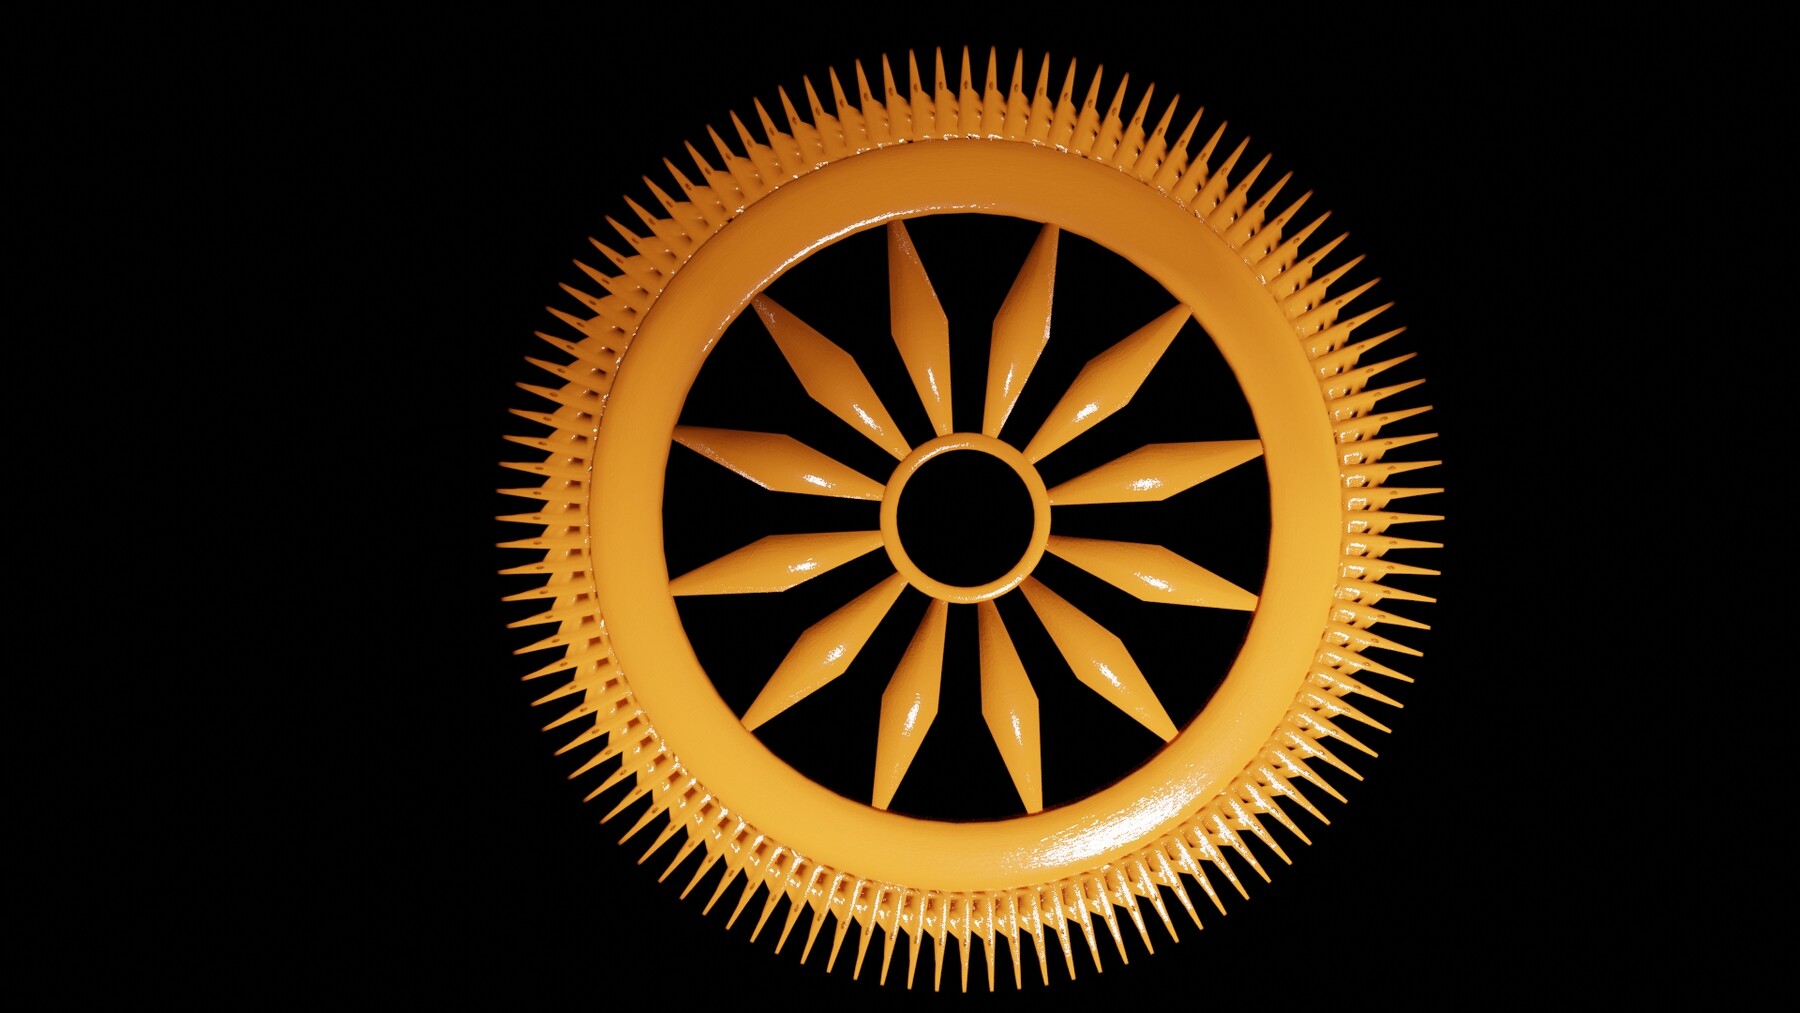 Sudarshan Chakra Posters for Sale | Redbubble